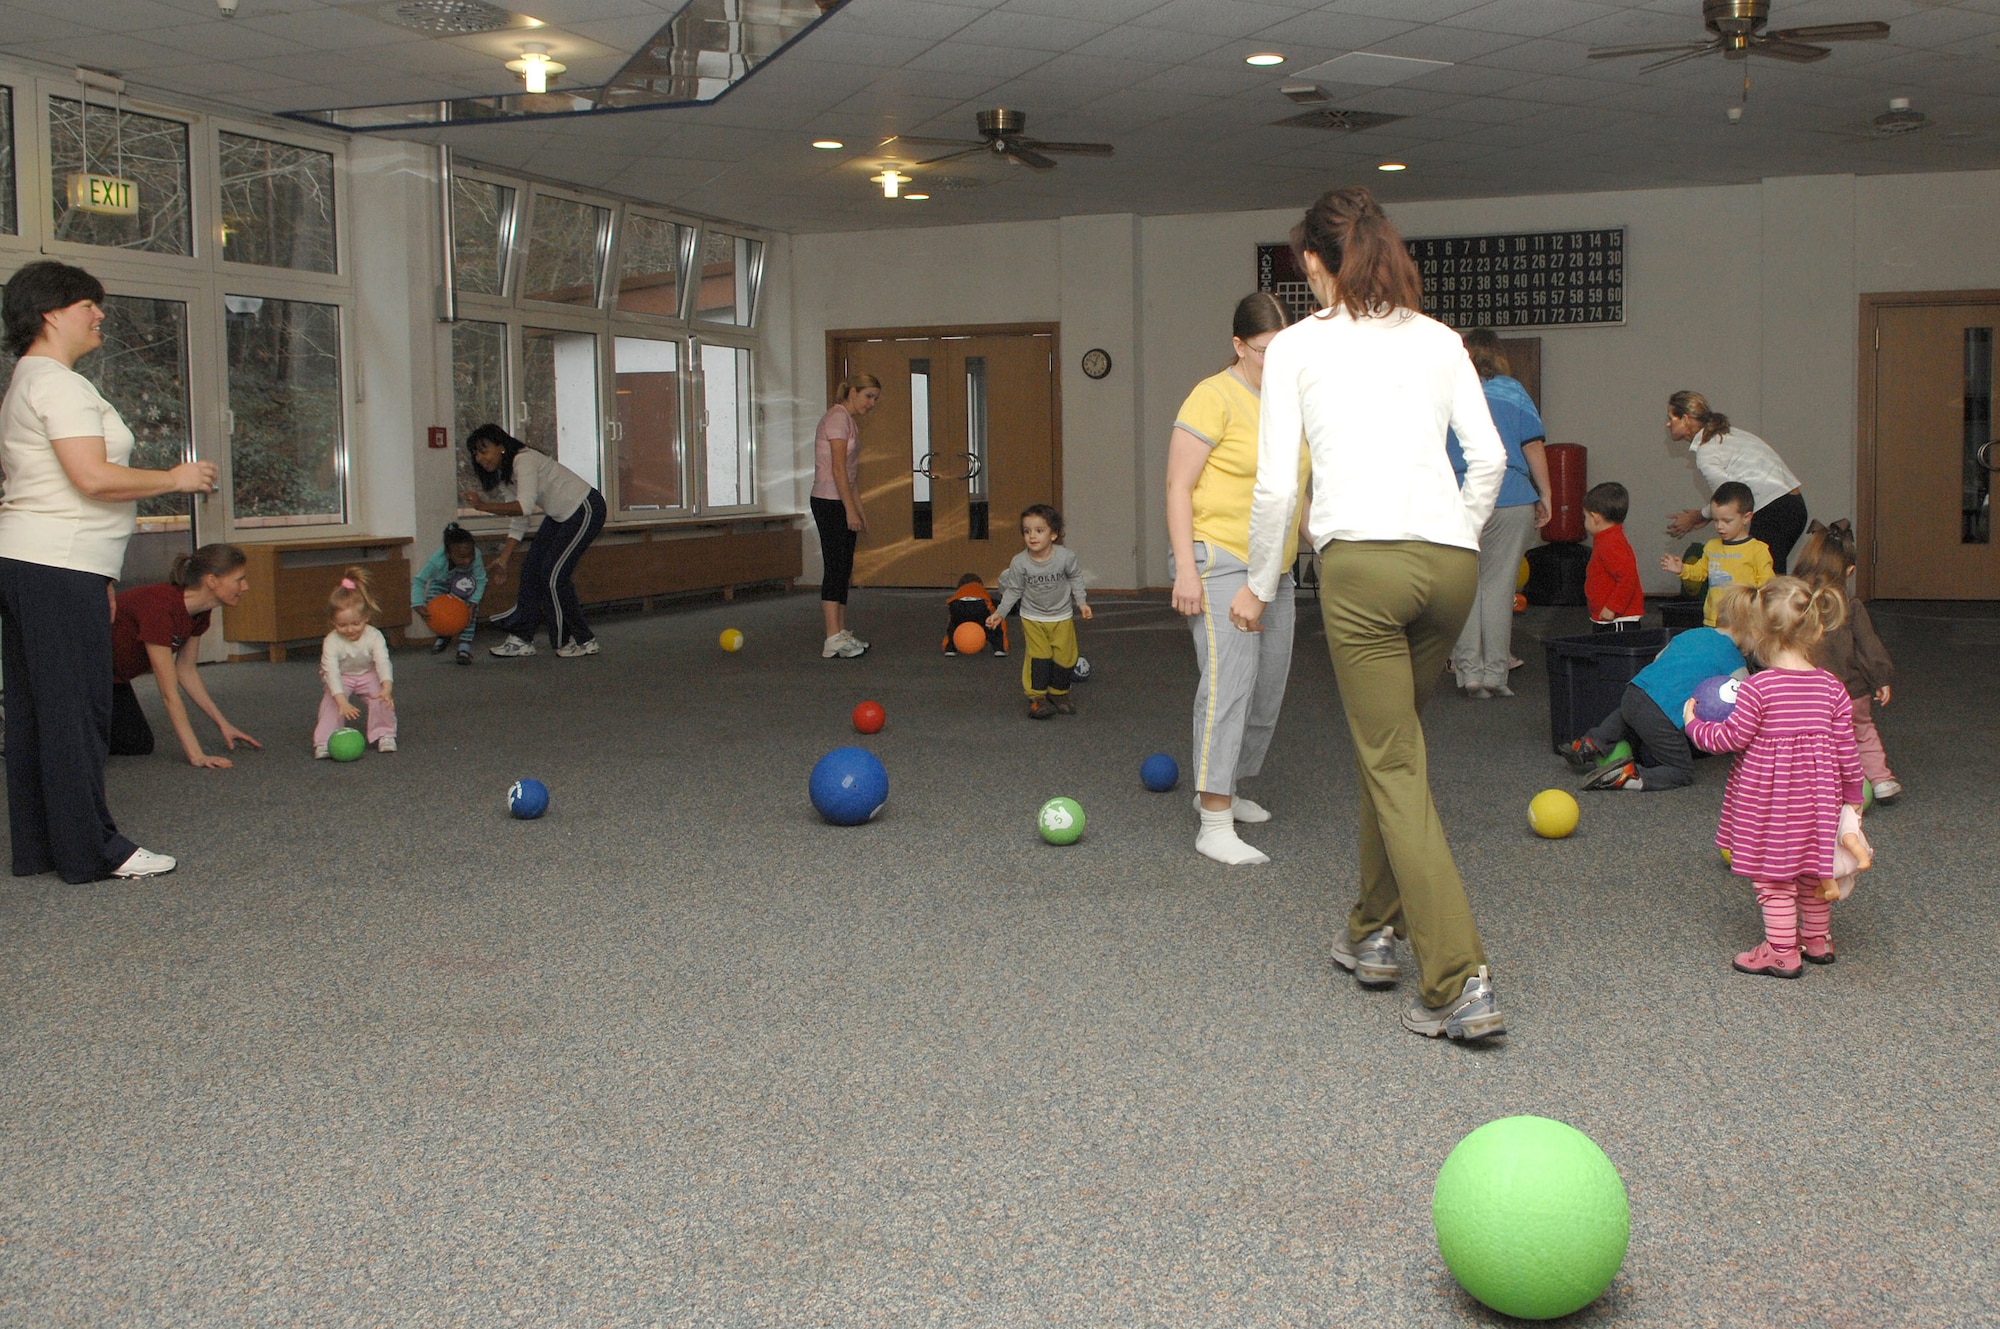 At the beginning of the Mommy and Me Yoga and Fitness class, playground balls are thrown throughout the room as the children hurry to pick them up and place them back in the bins, Jan.18, at the Vogelweh Community Center. This is one of the many activities done to get the children warmed up for the class. (U.S. Air Force photo/Senior Airman Megan M. Carrico)